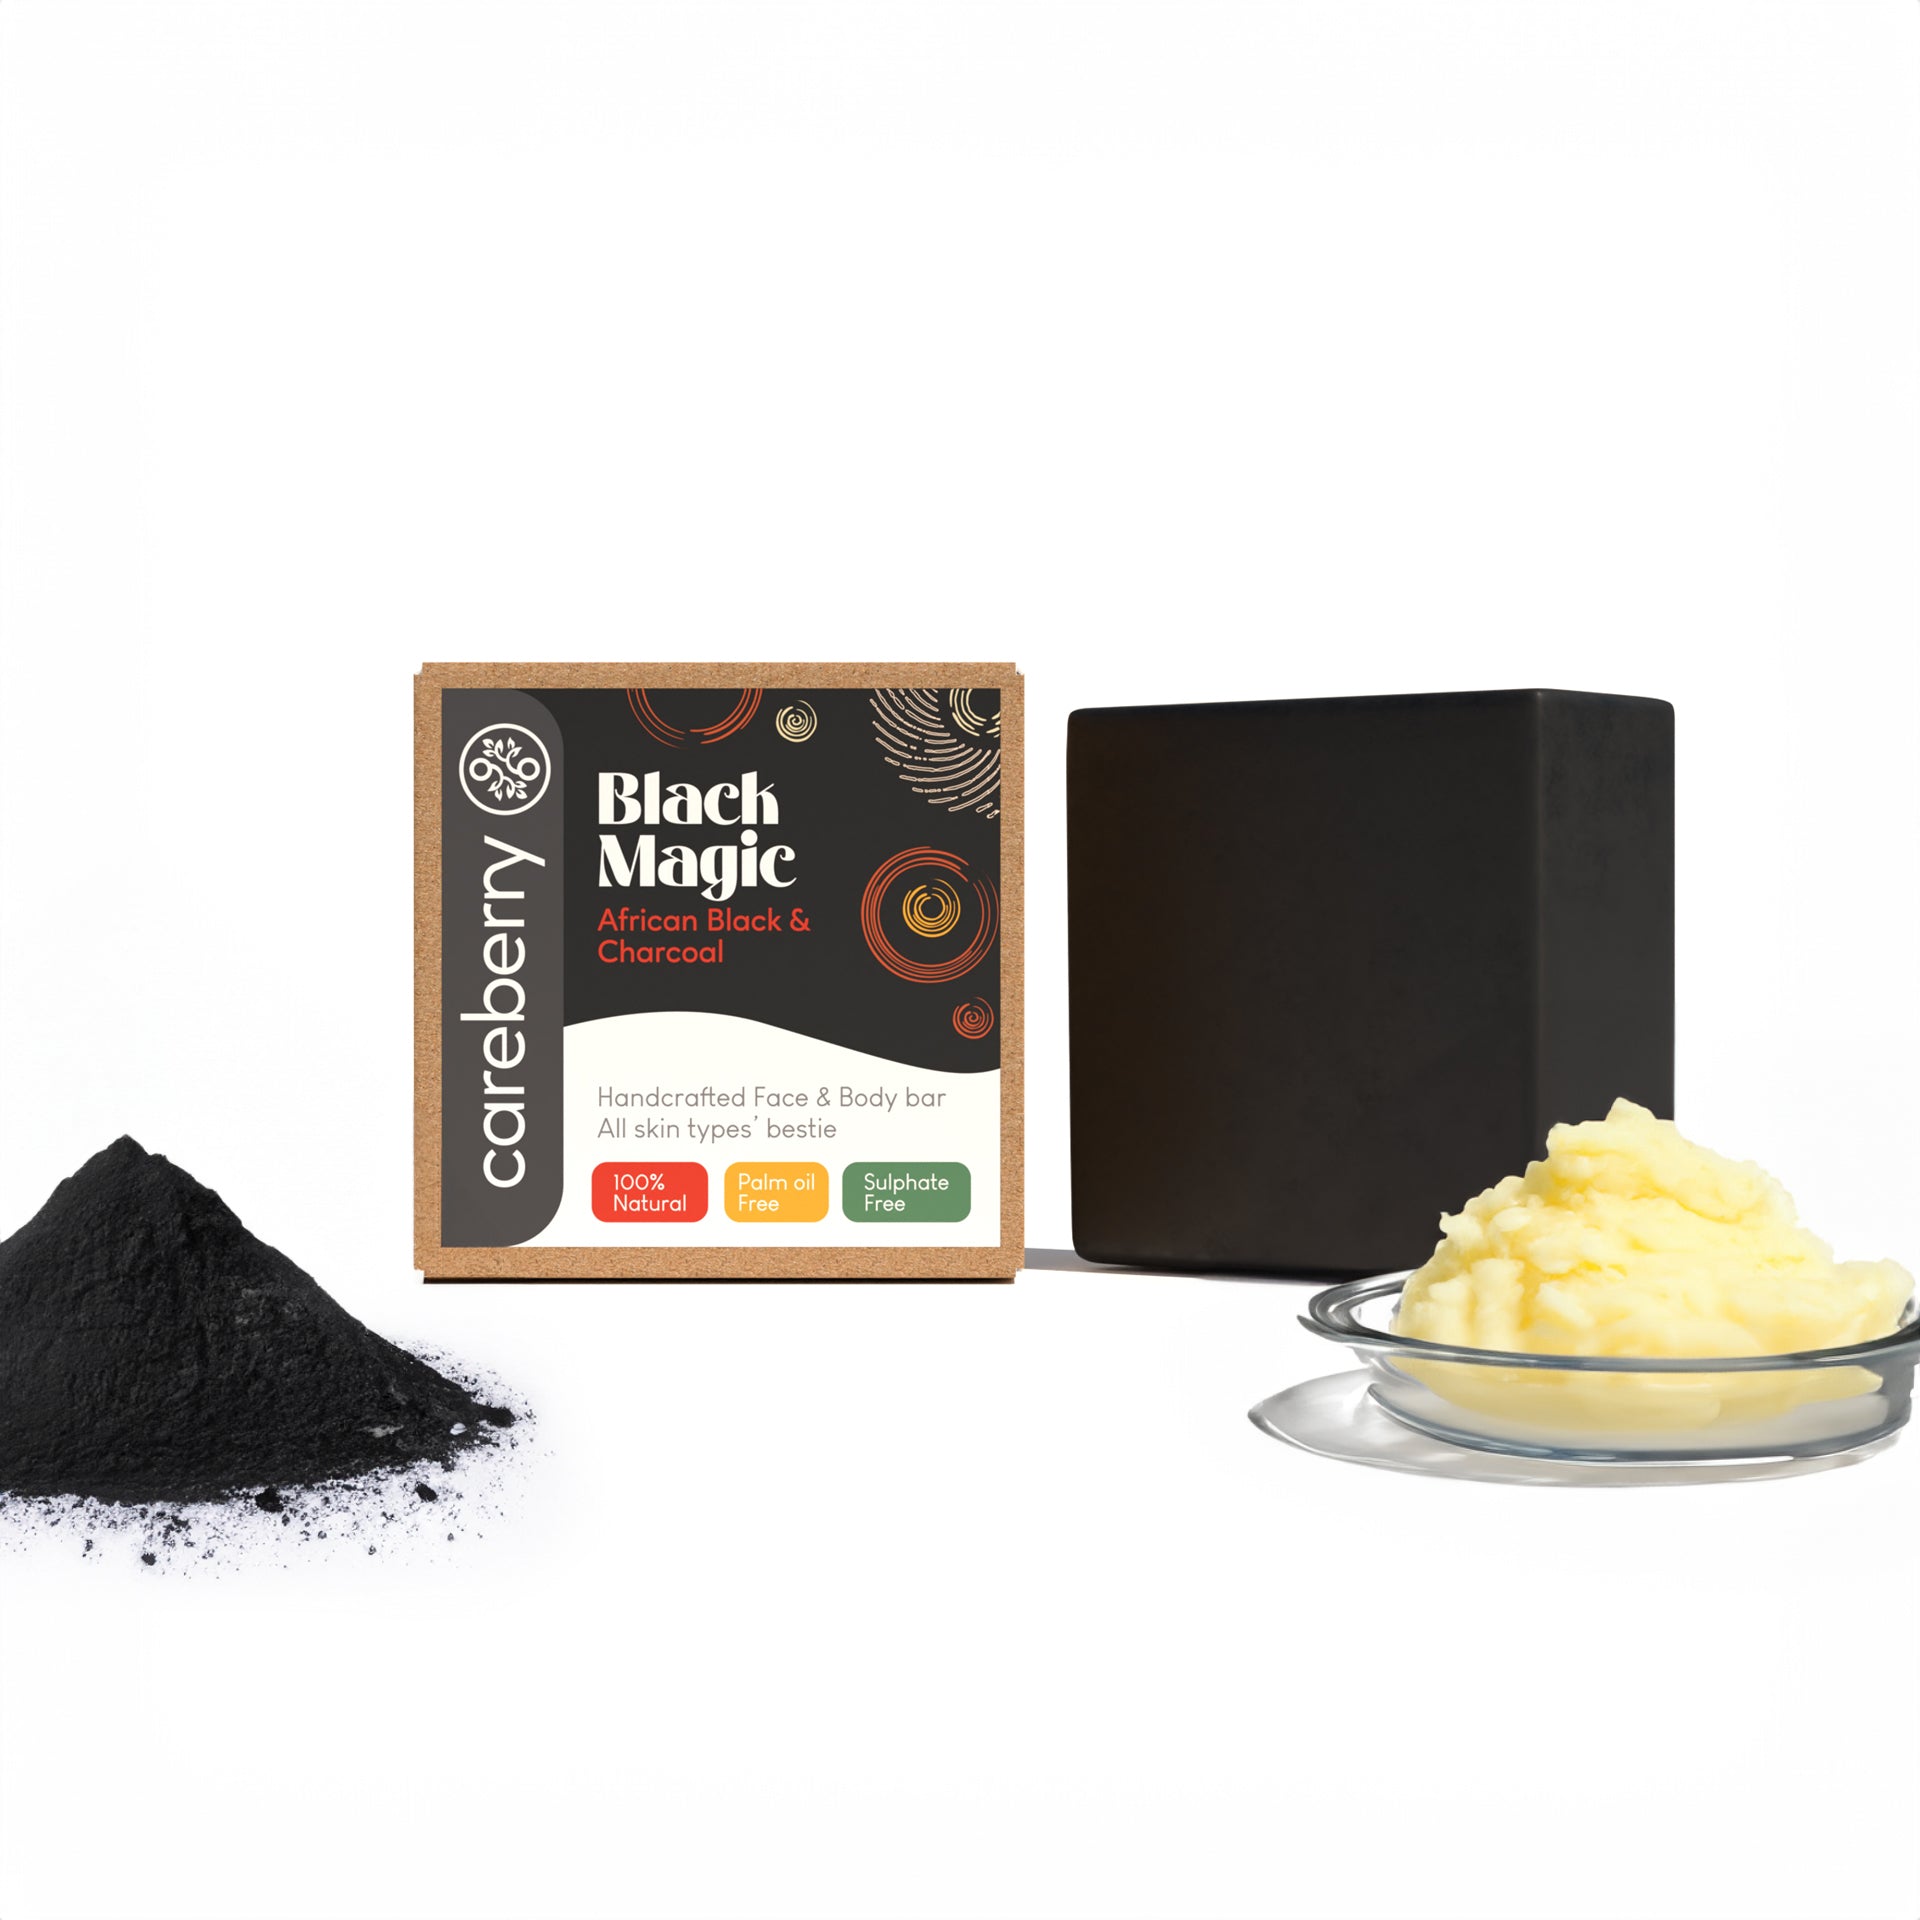 Handcrafted ayurvedic African Balck Soap & Charcoal